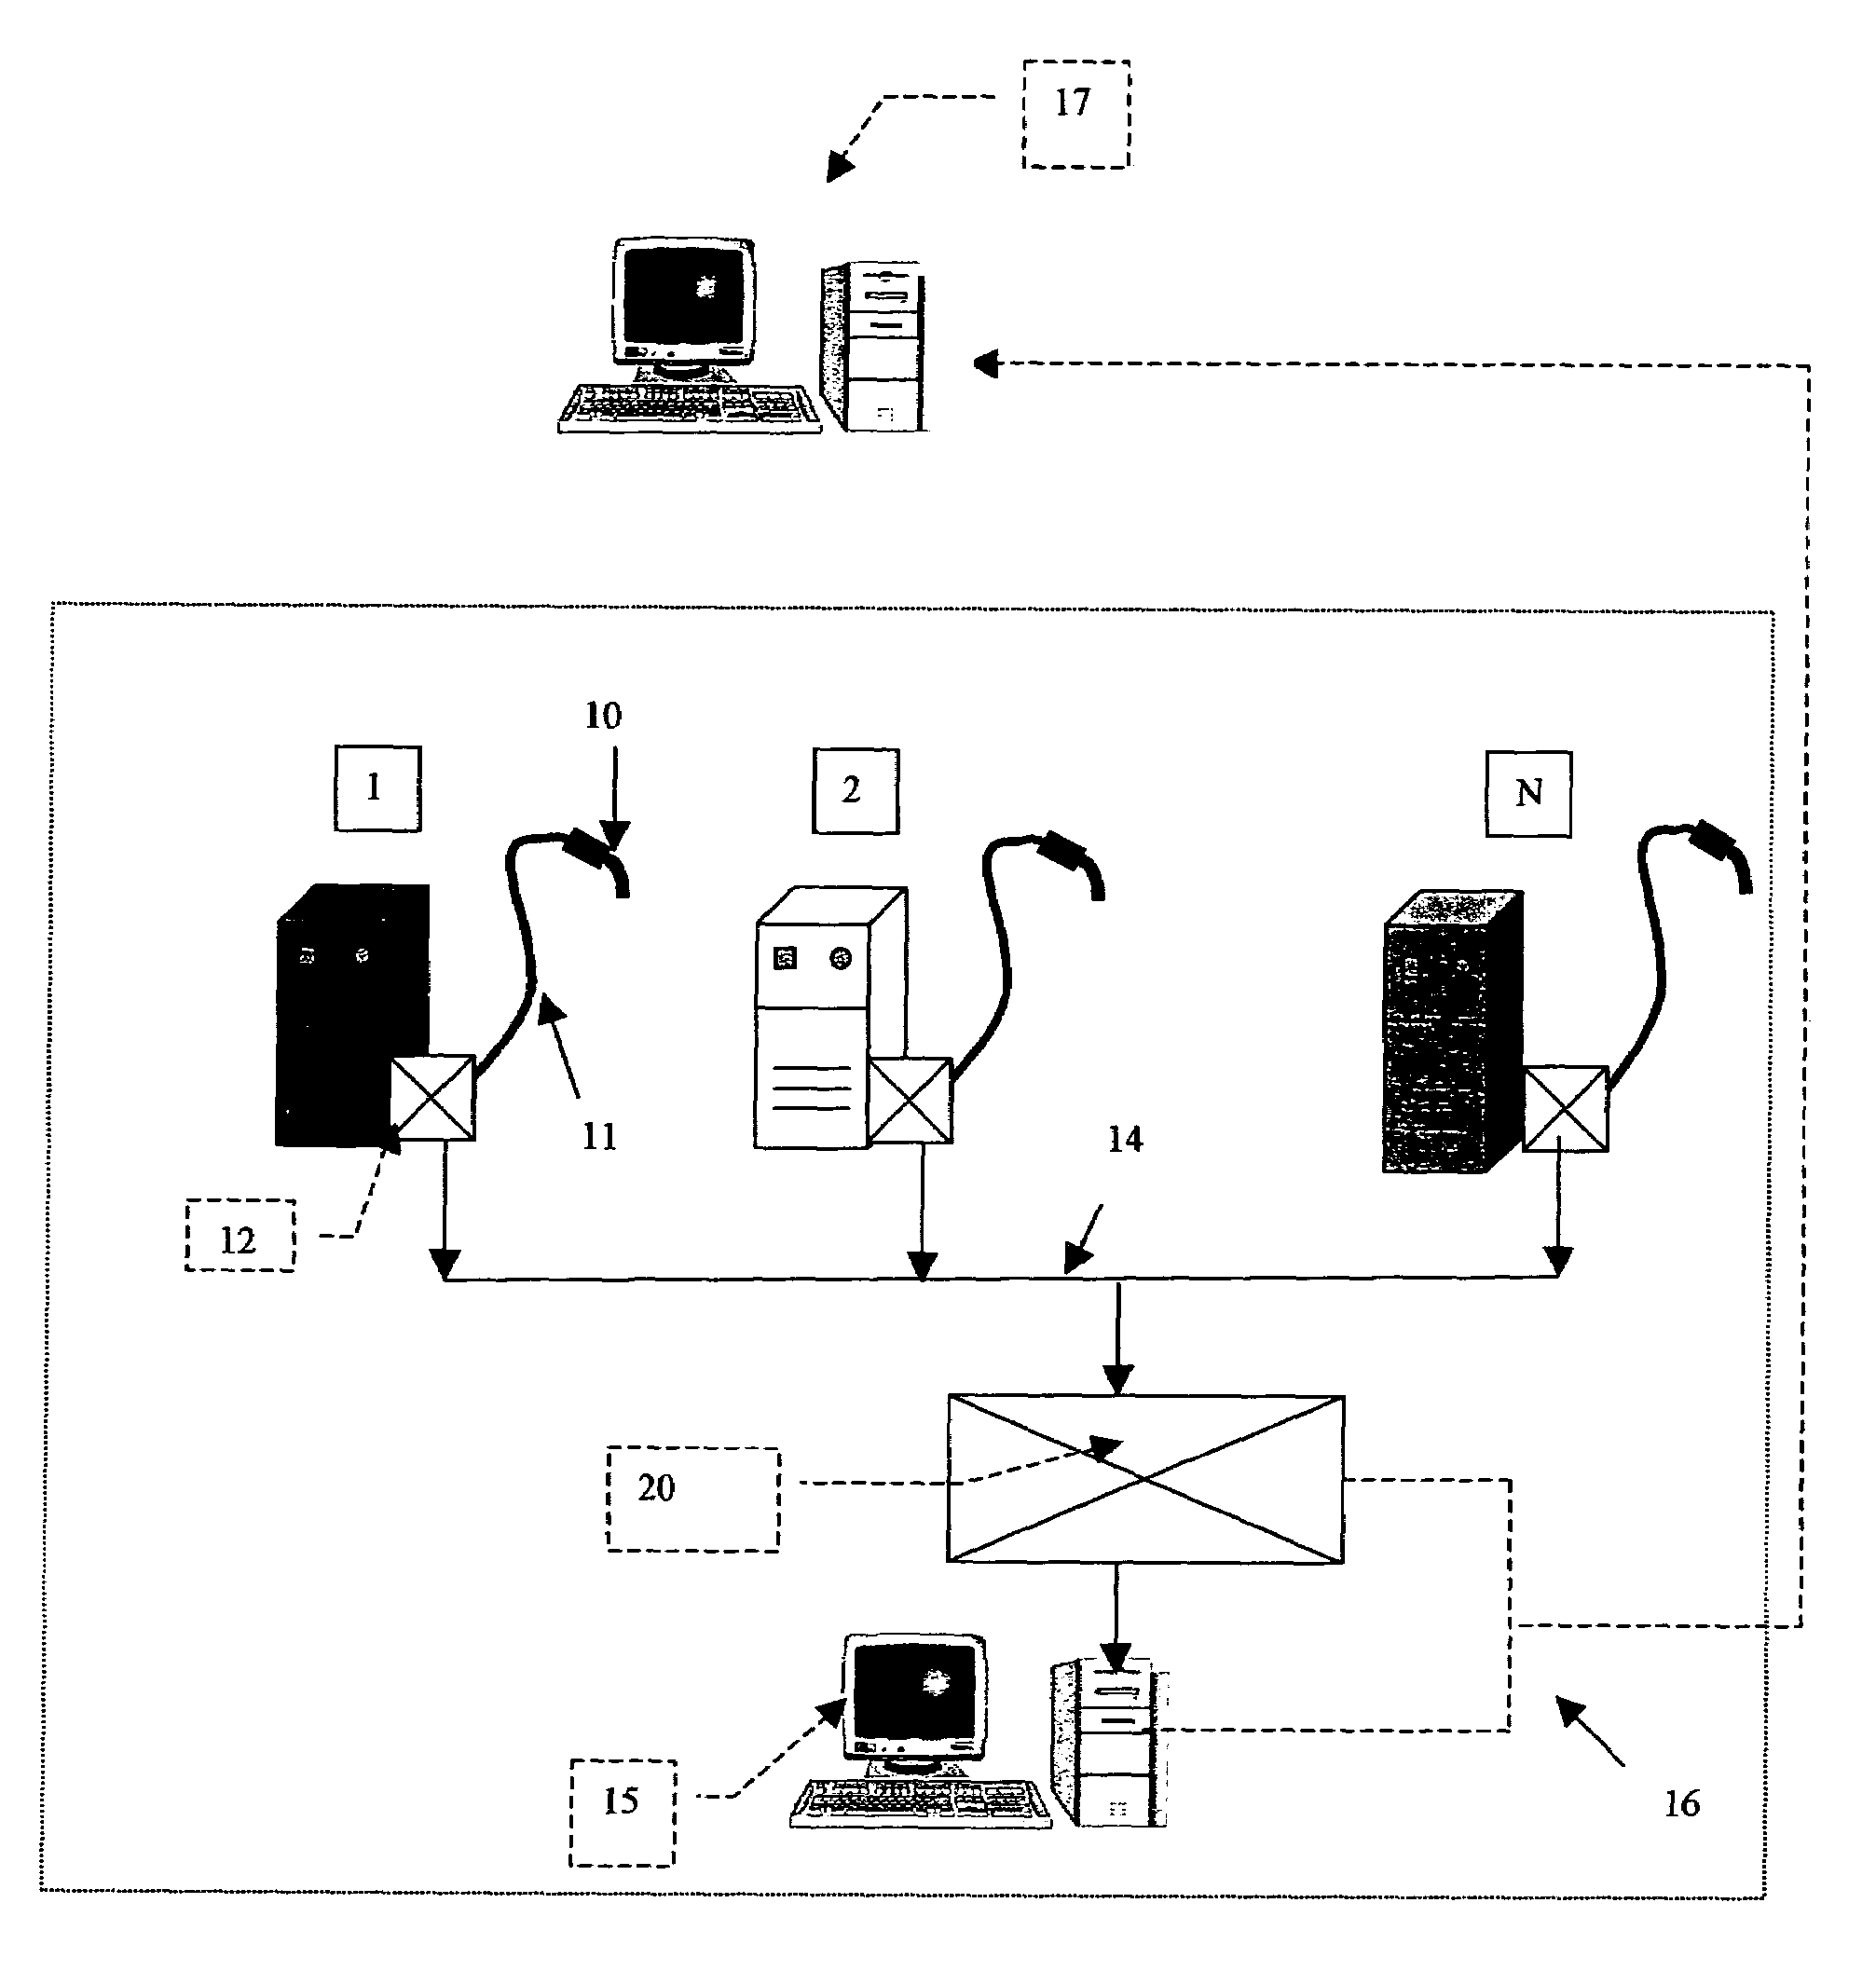 System and method for improving the productivity of a welding shop